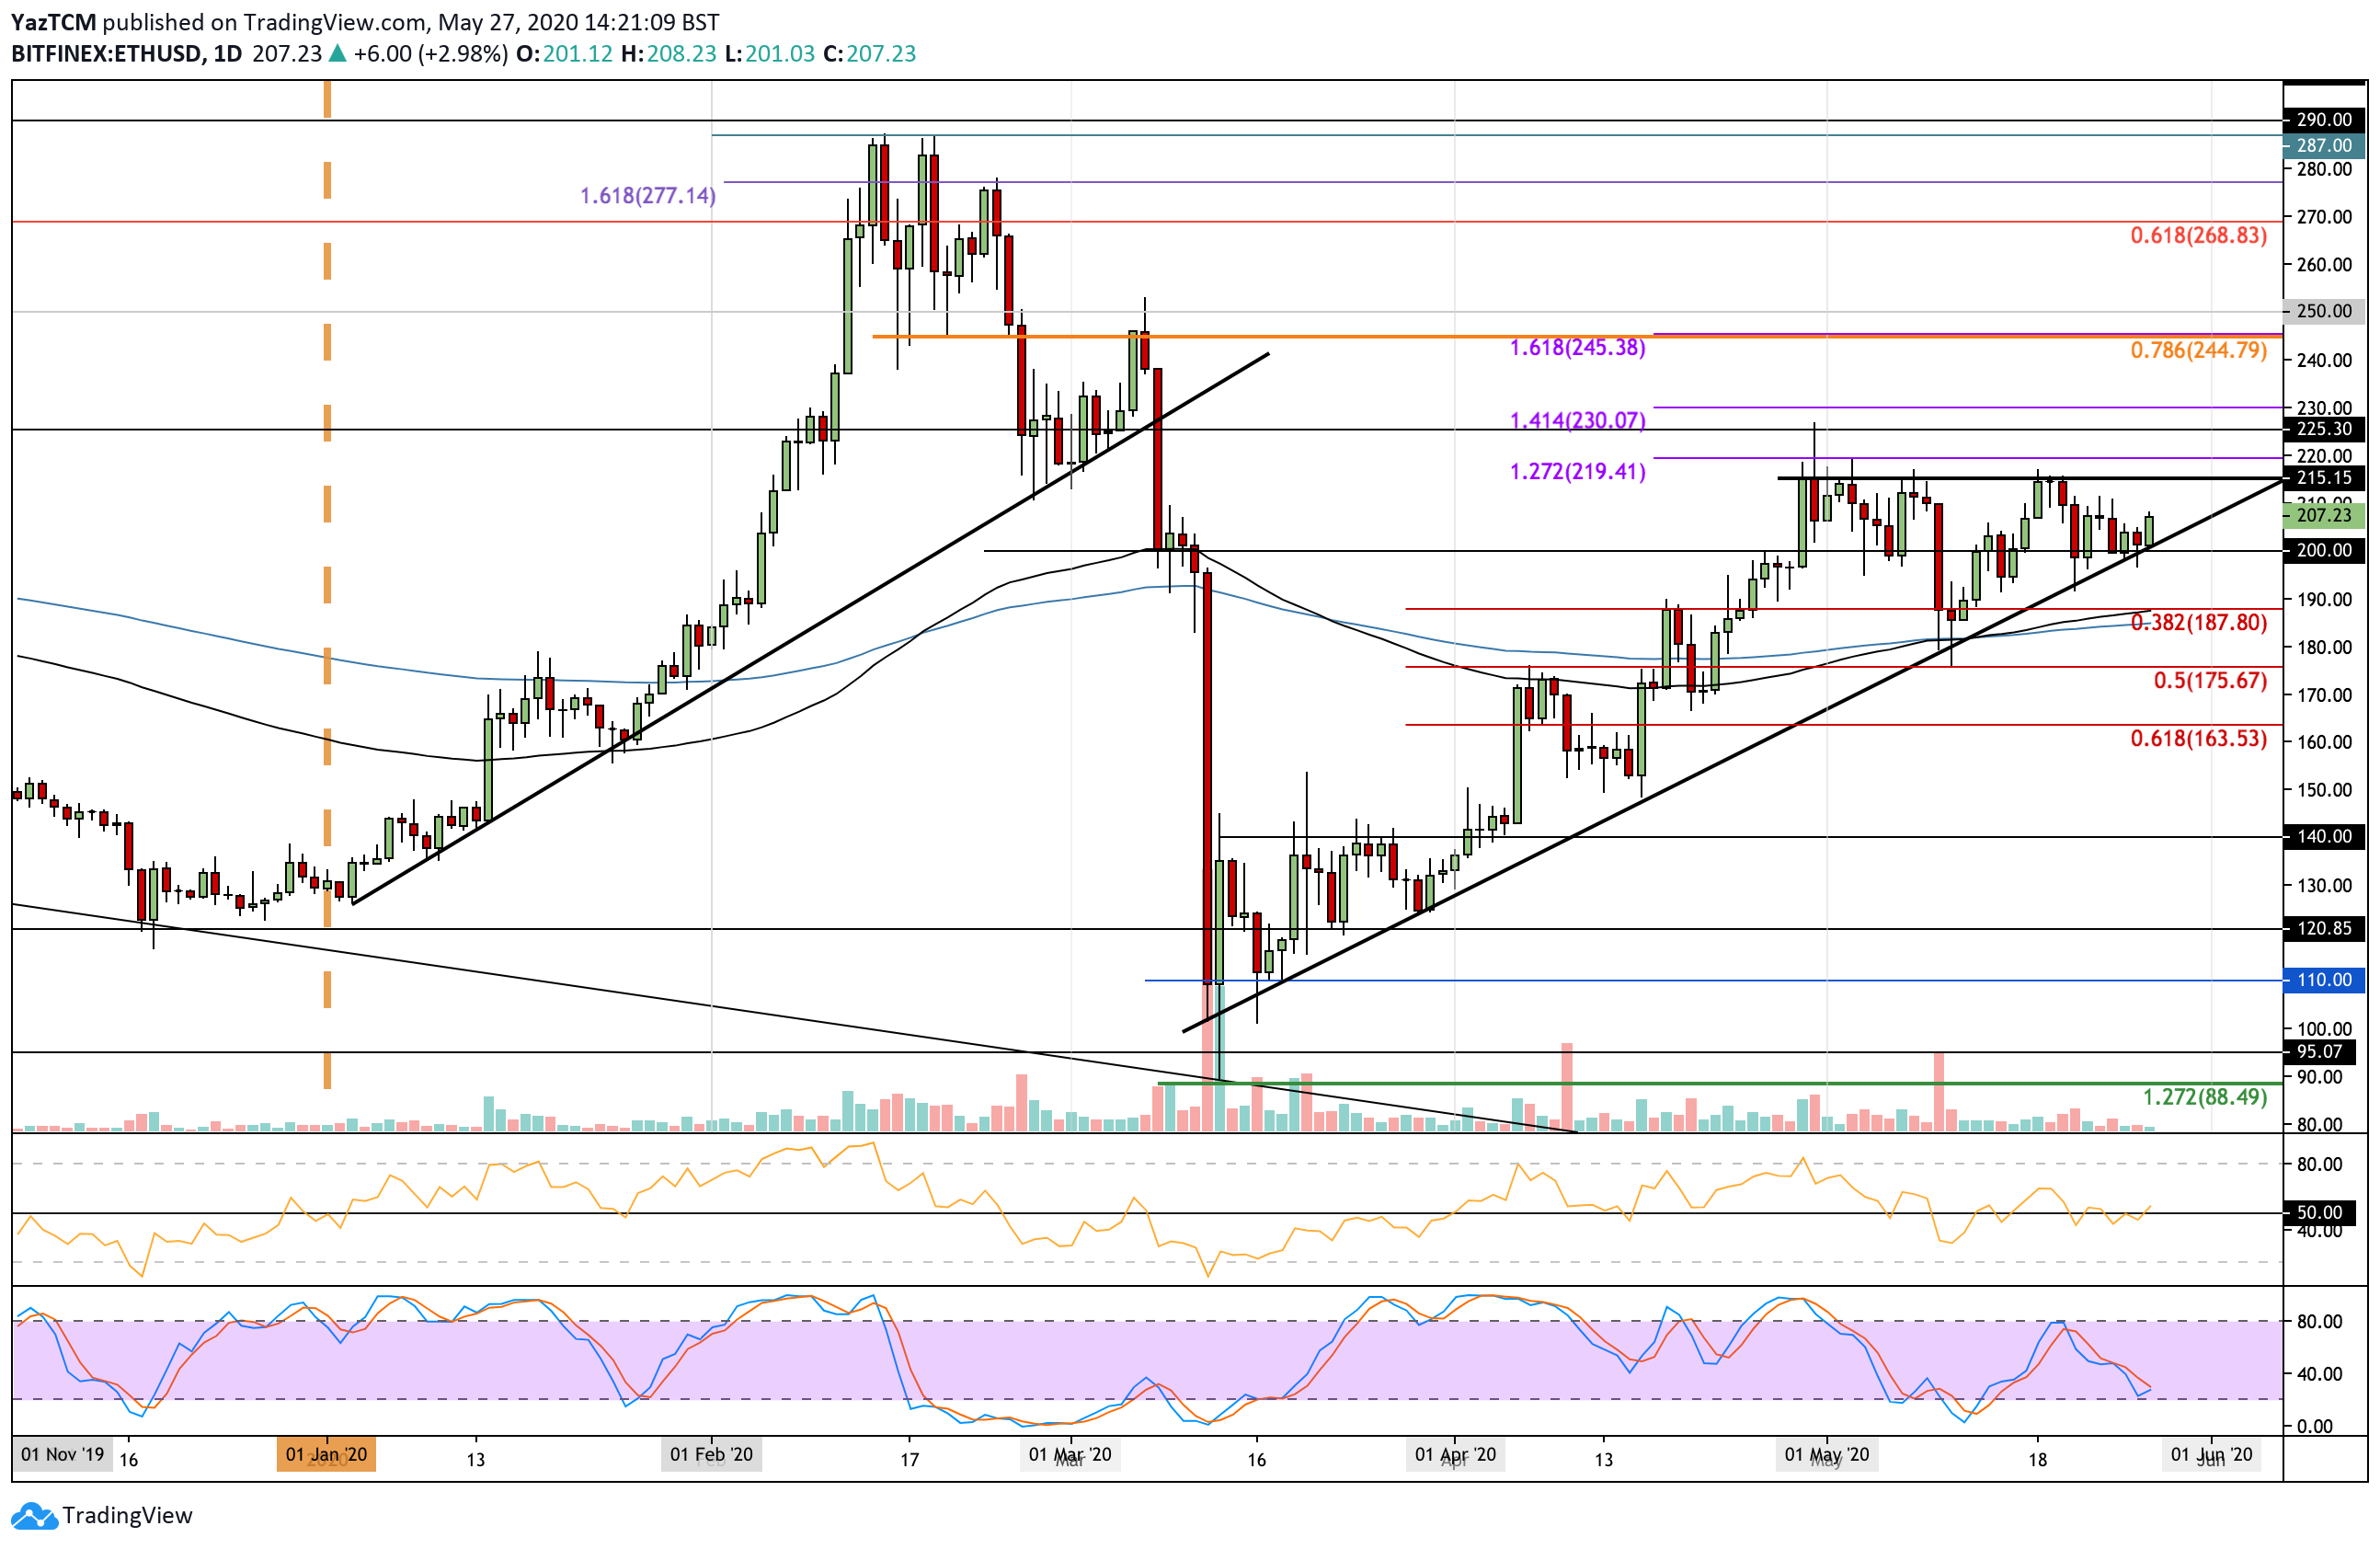 Ethereum Price Analysis: ETH Bounces From $200 But Shows Weakness Against The Rising Bitcoin